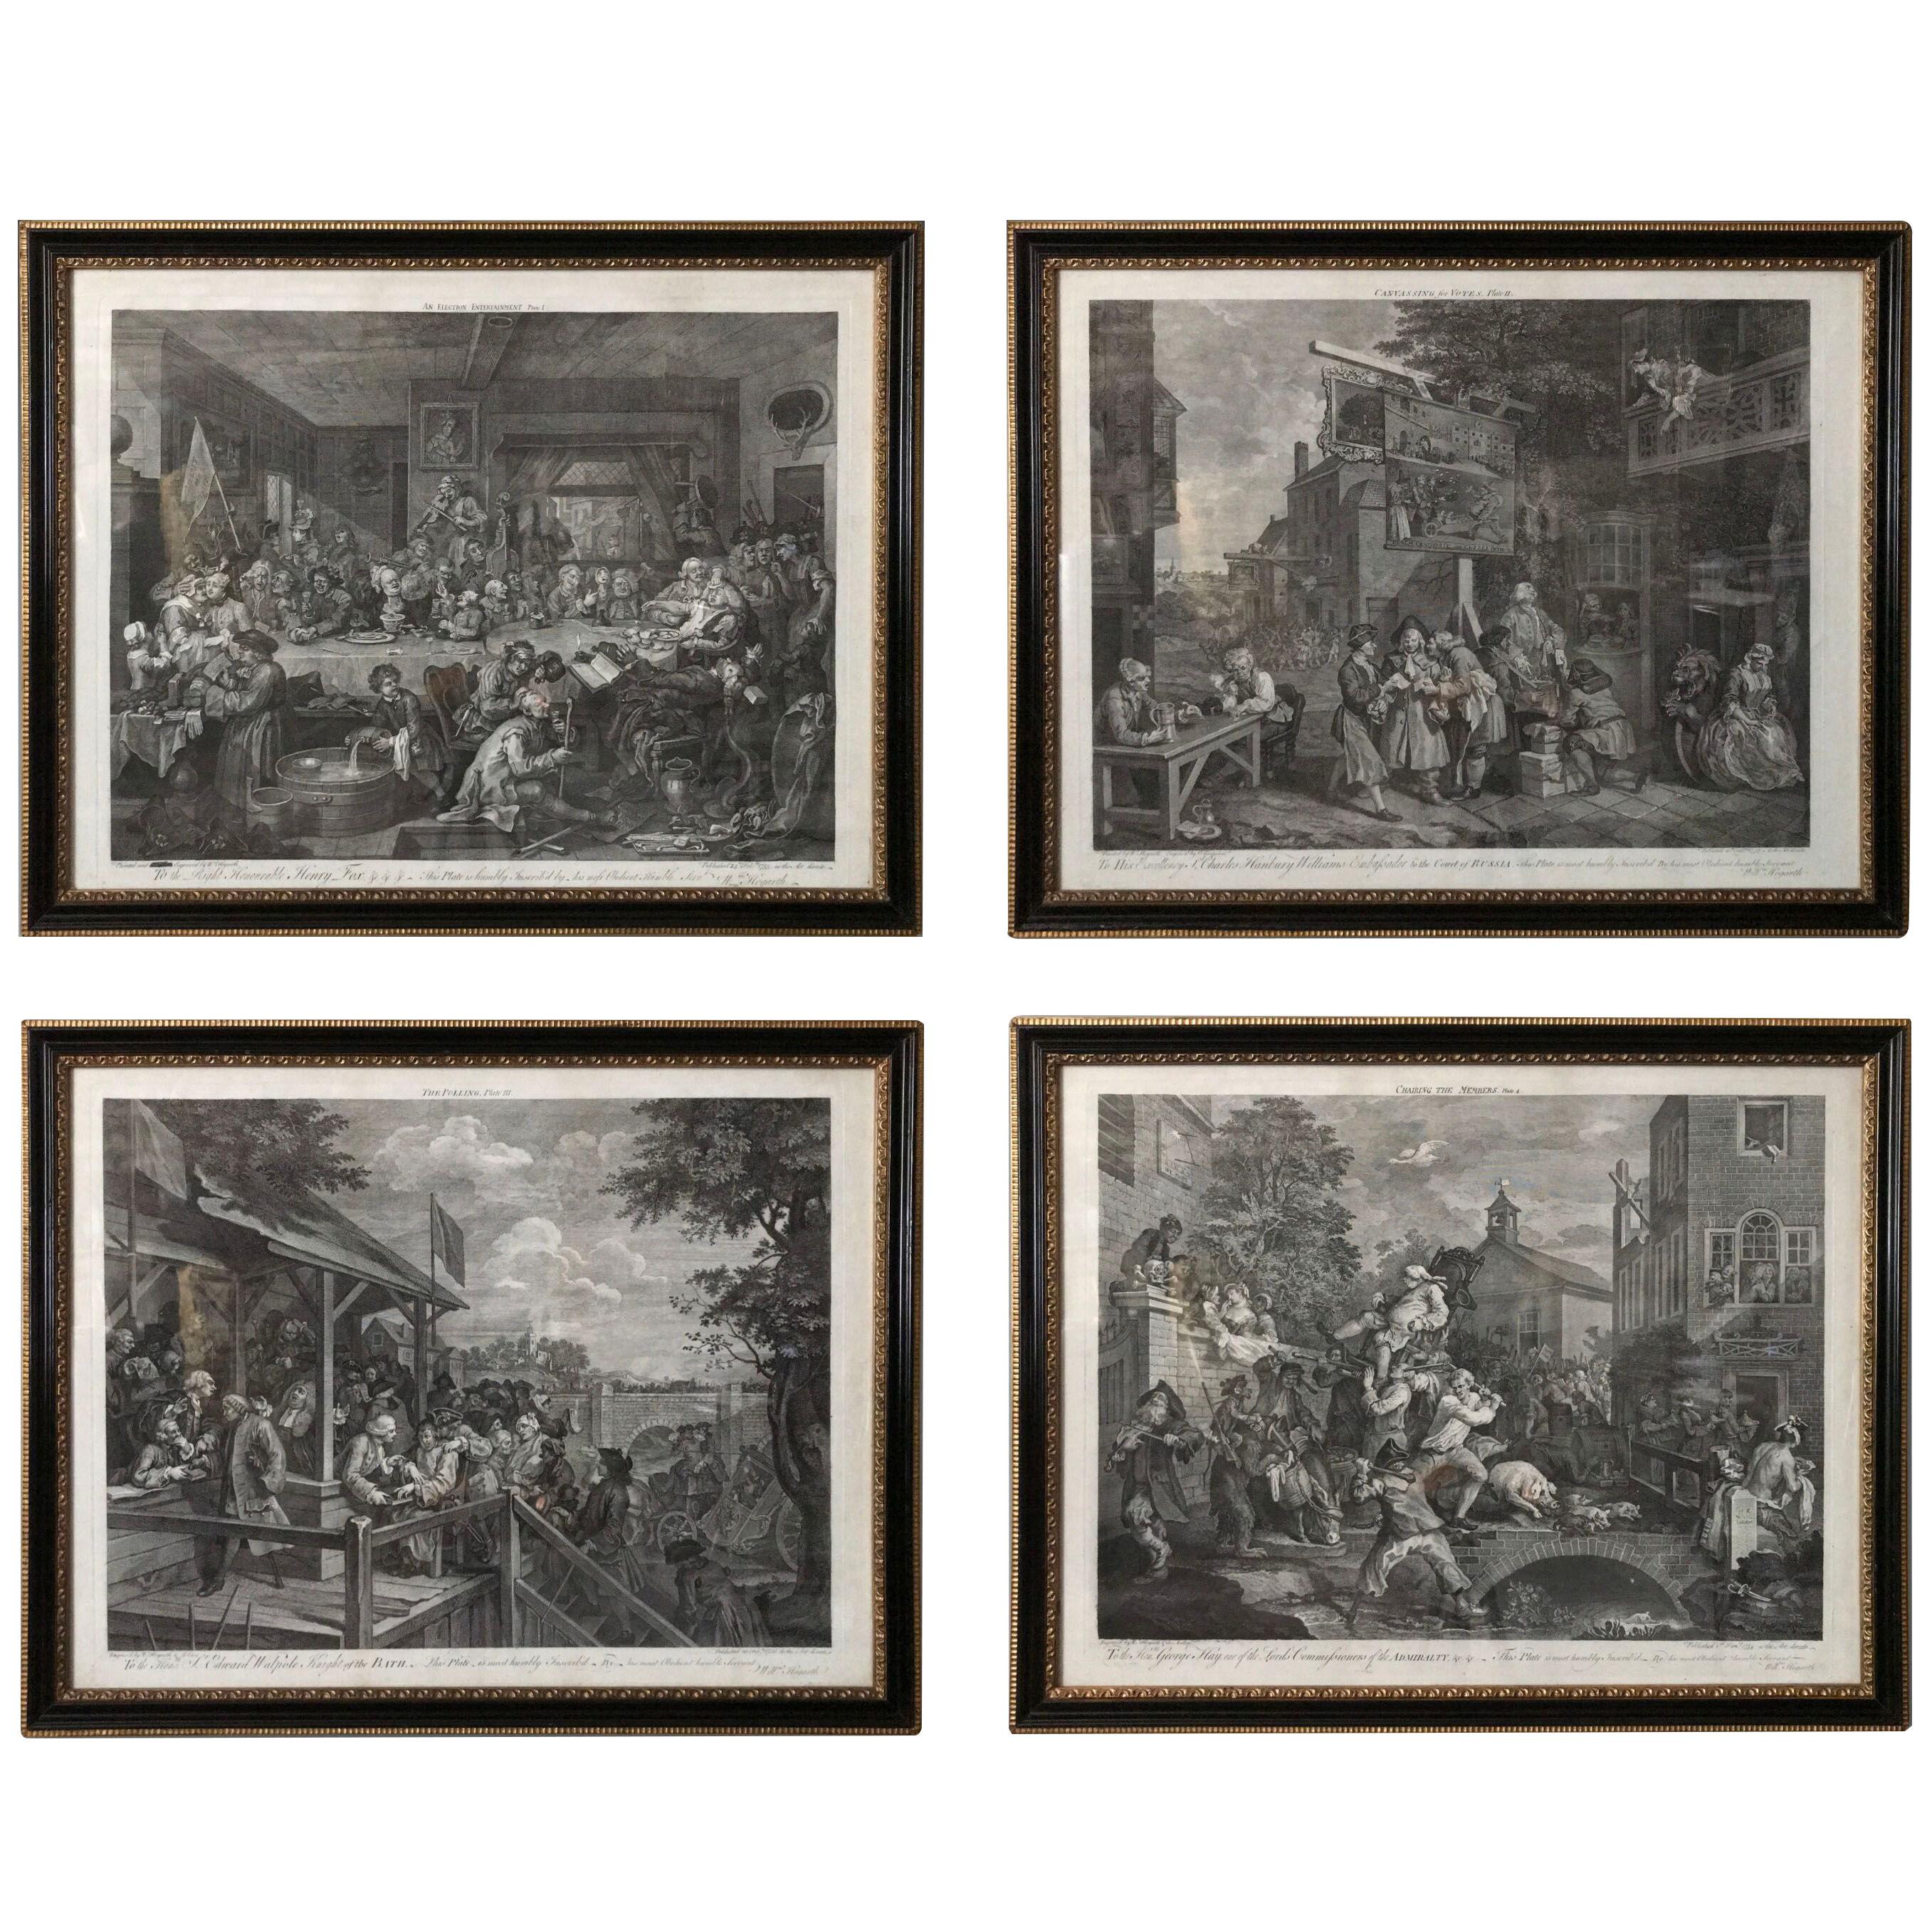 Set of 4 Hogarth Engravings - The 'Prints of an Election'